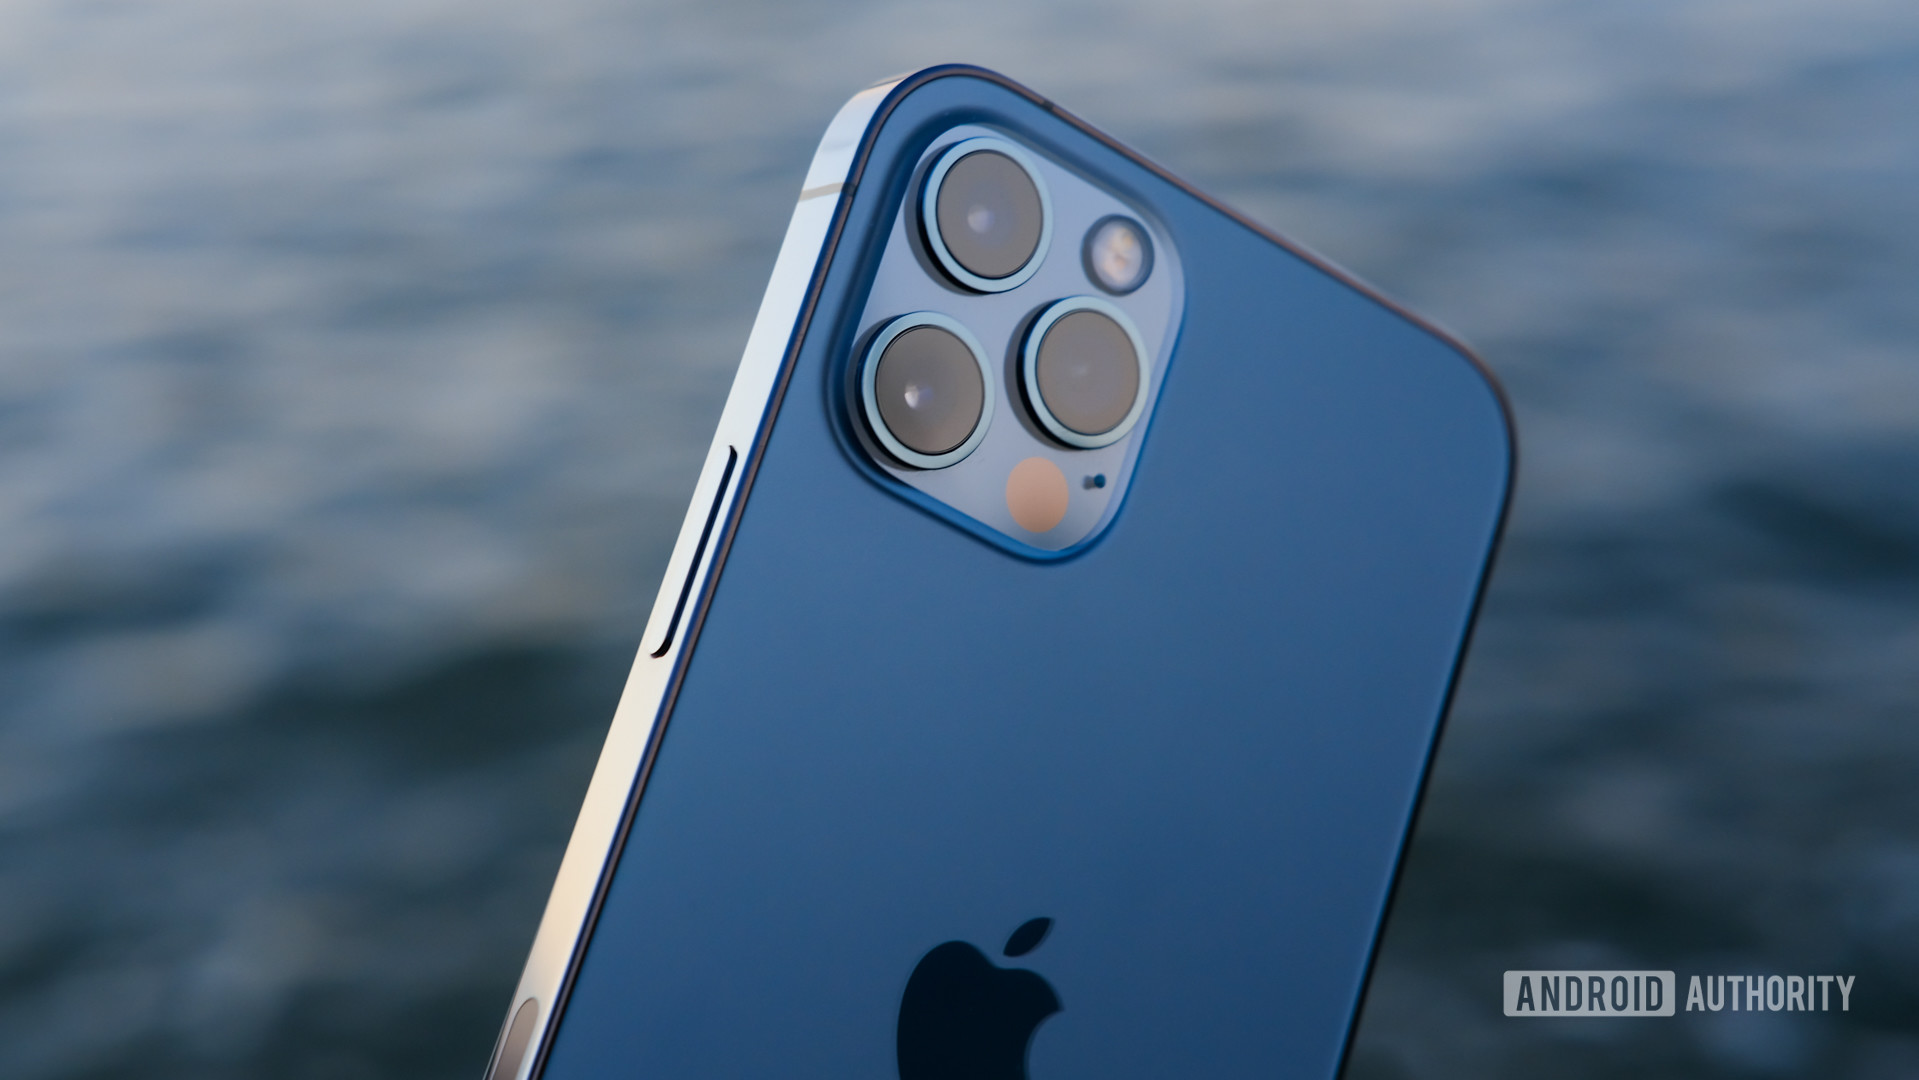 Apple iPhone 12 Pro review: All the right angles - Android